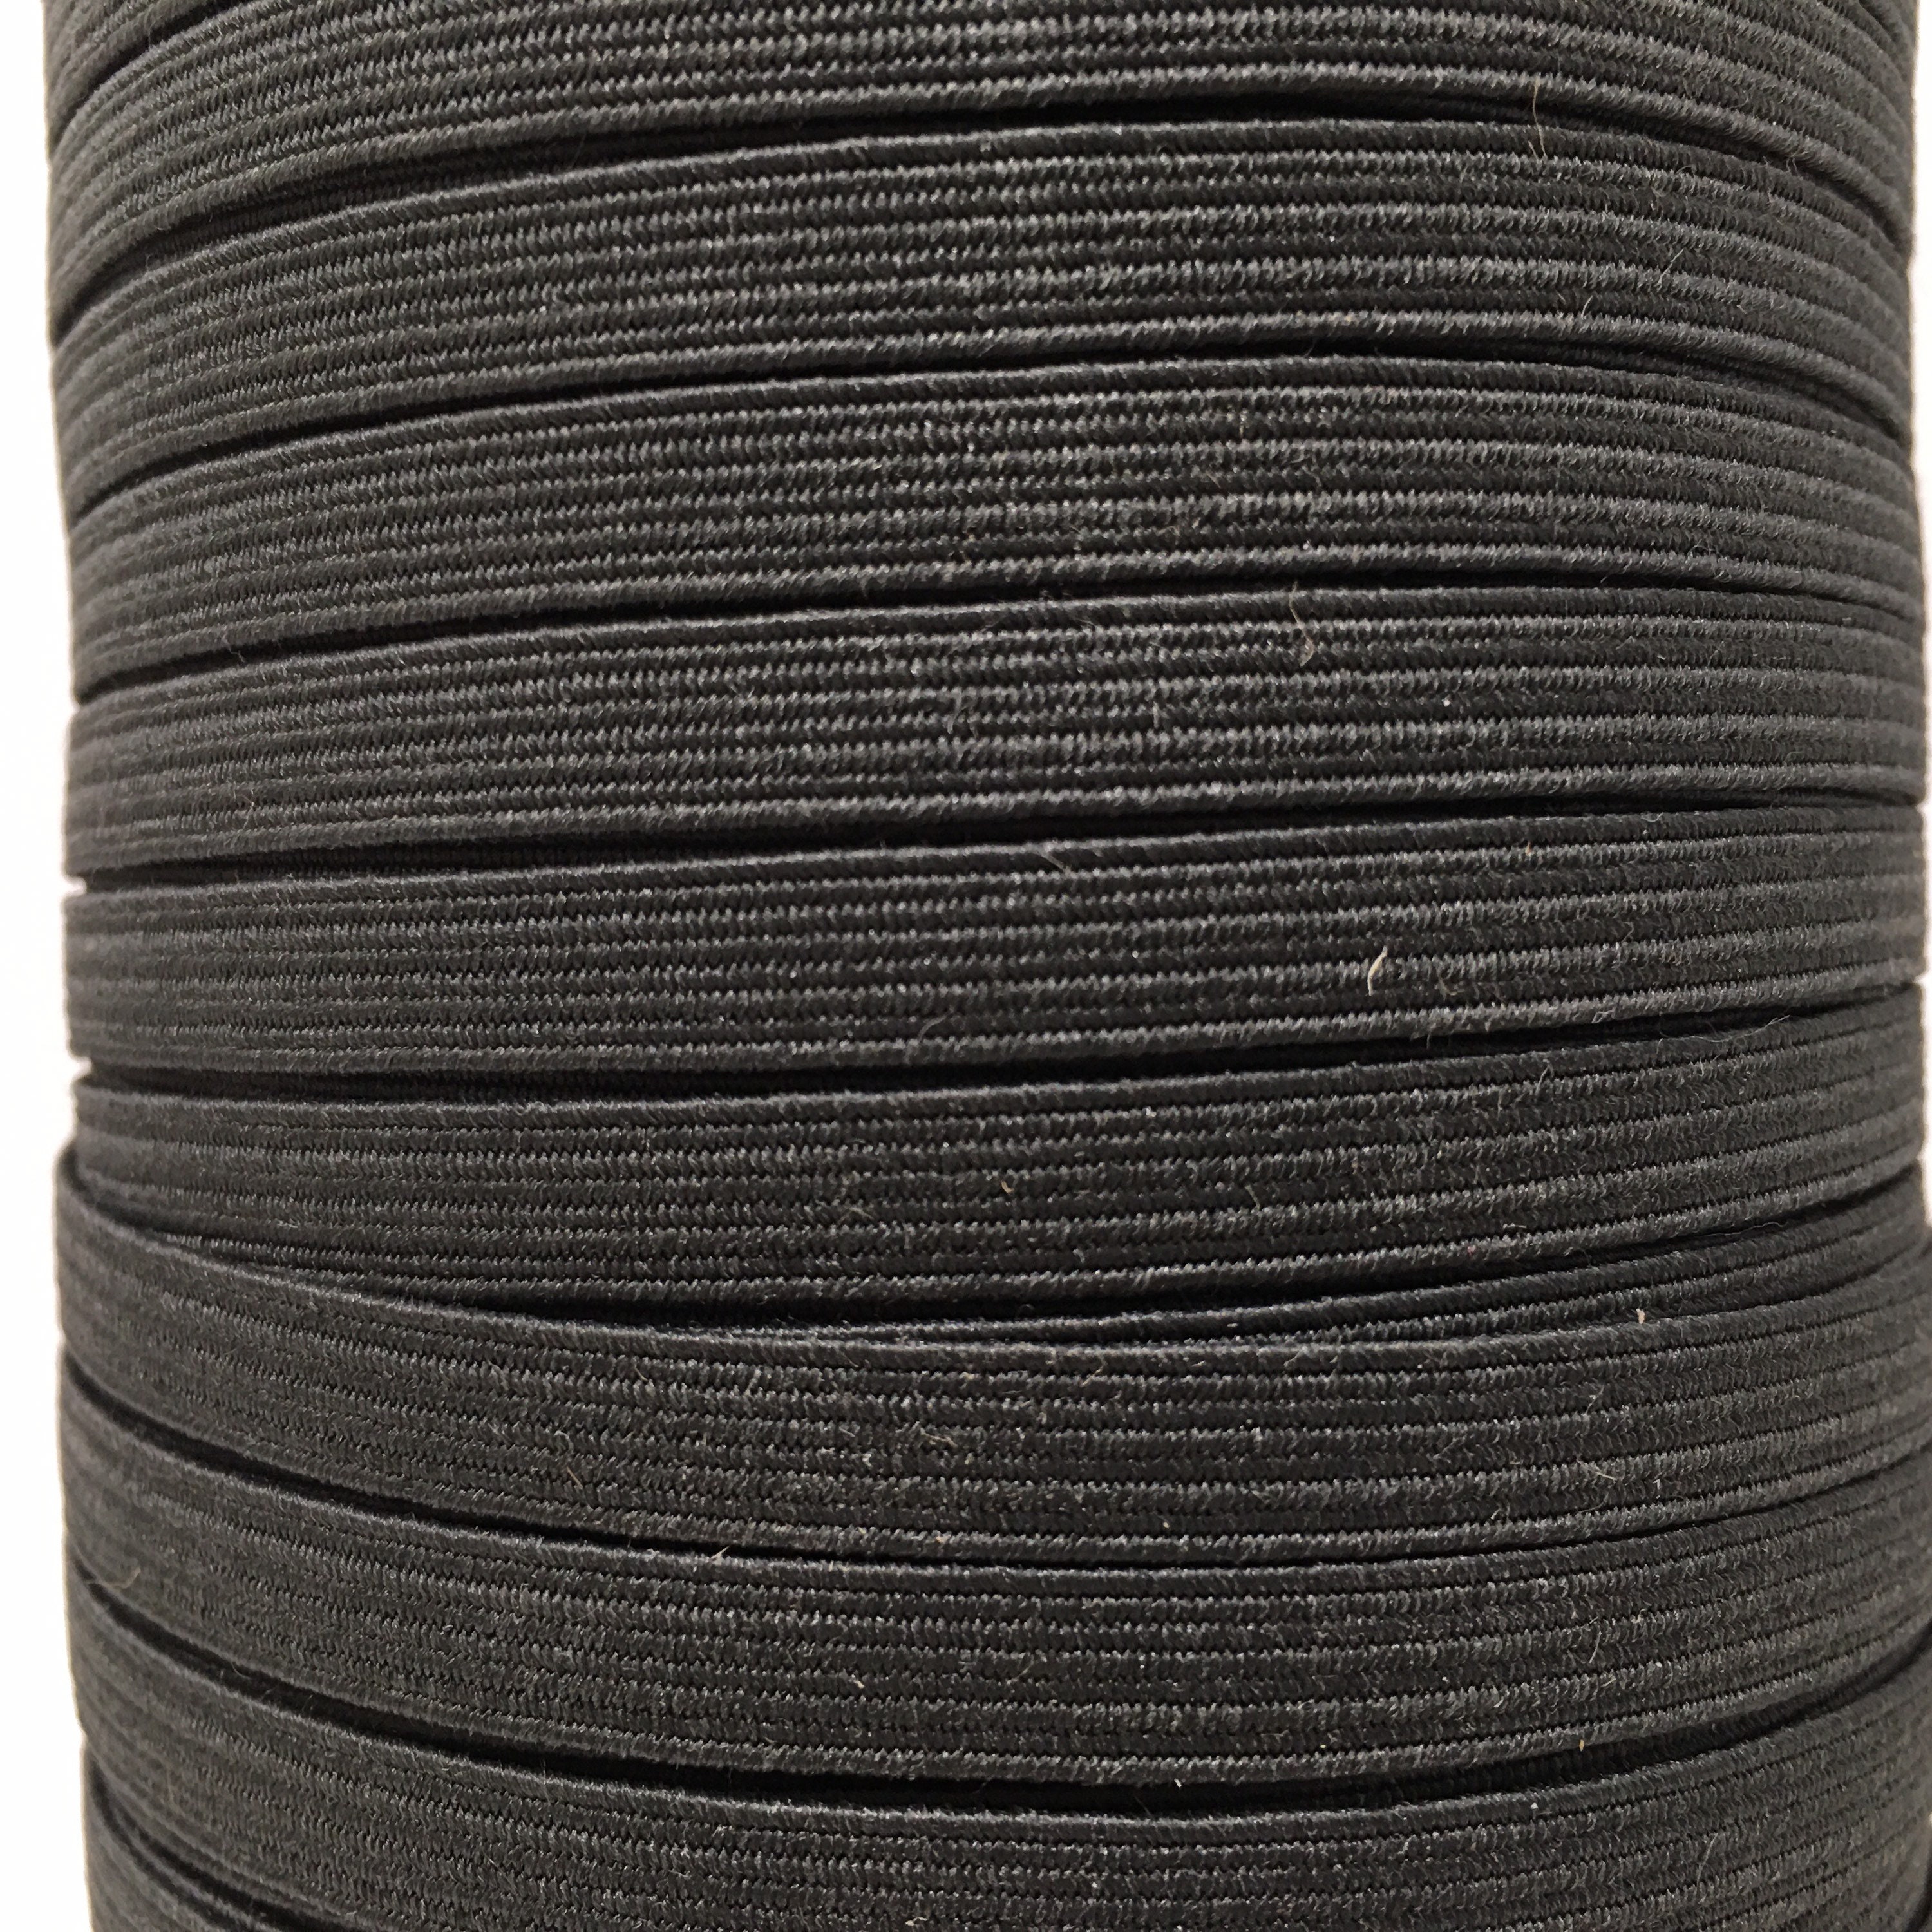 Poly-Fil Spandex Elastic Cording 20 yards by Fairfield